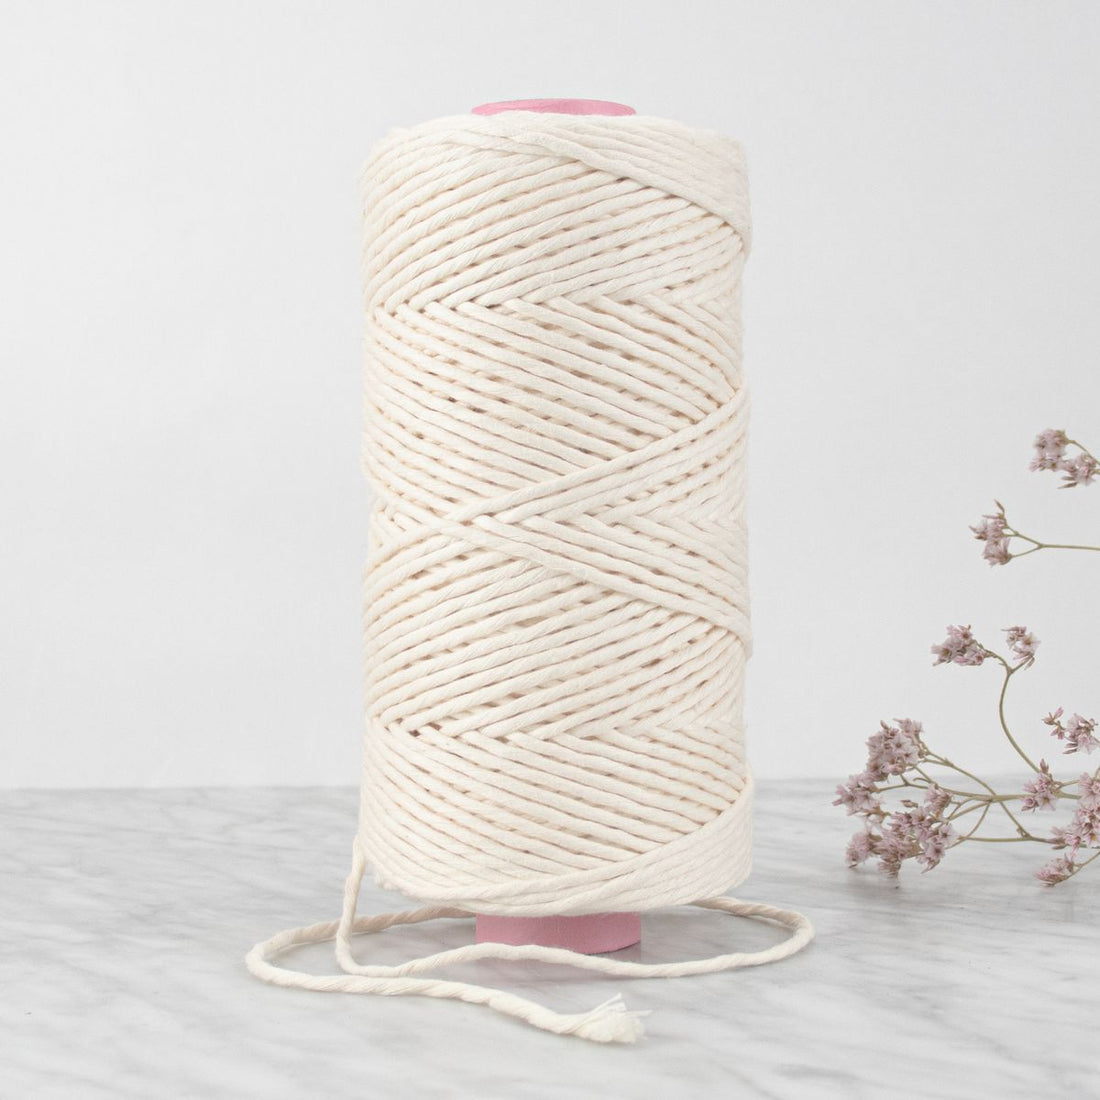 Egyptian 3mm Cotton String - 500 grams - Ivory